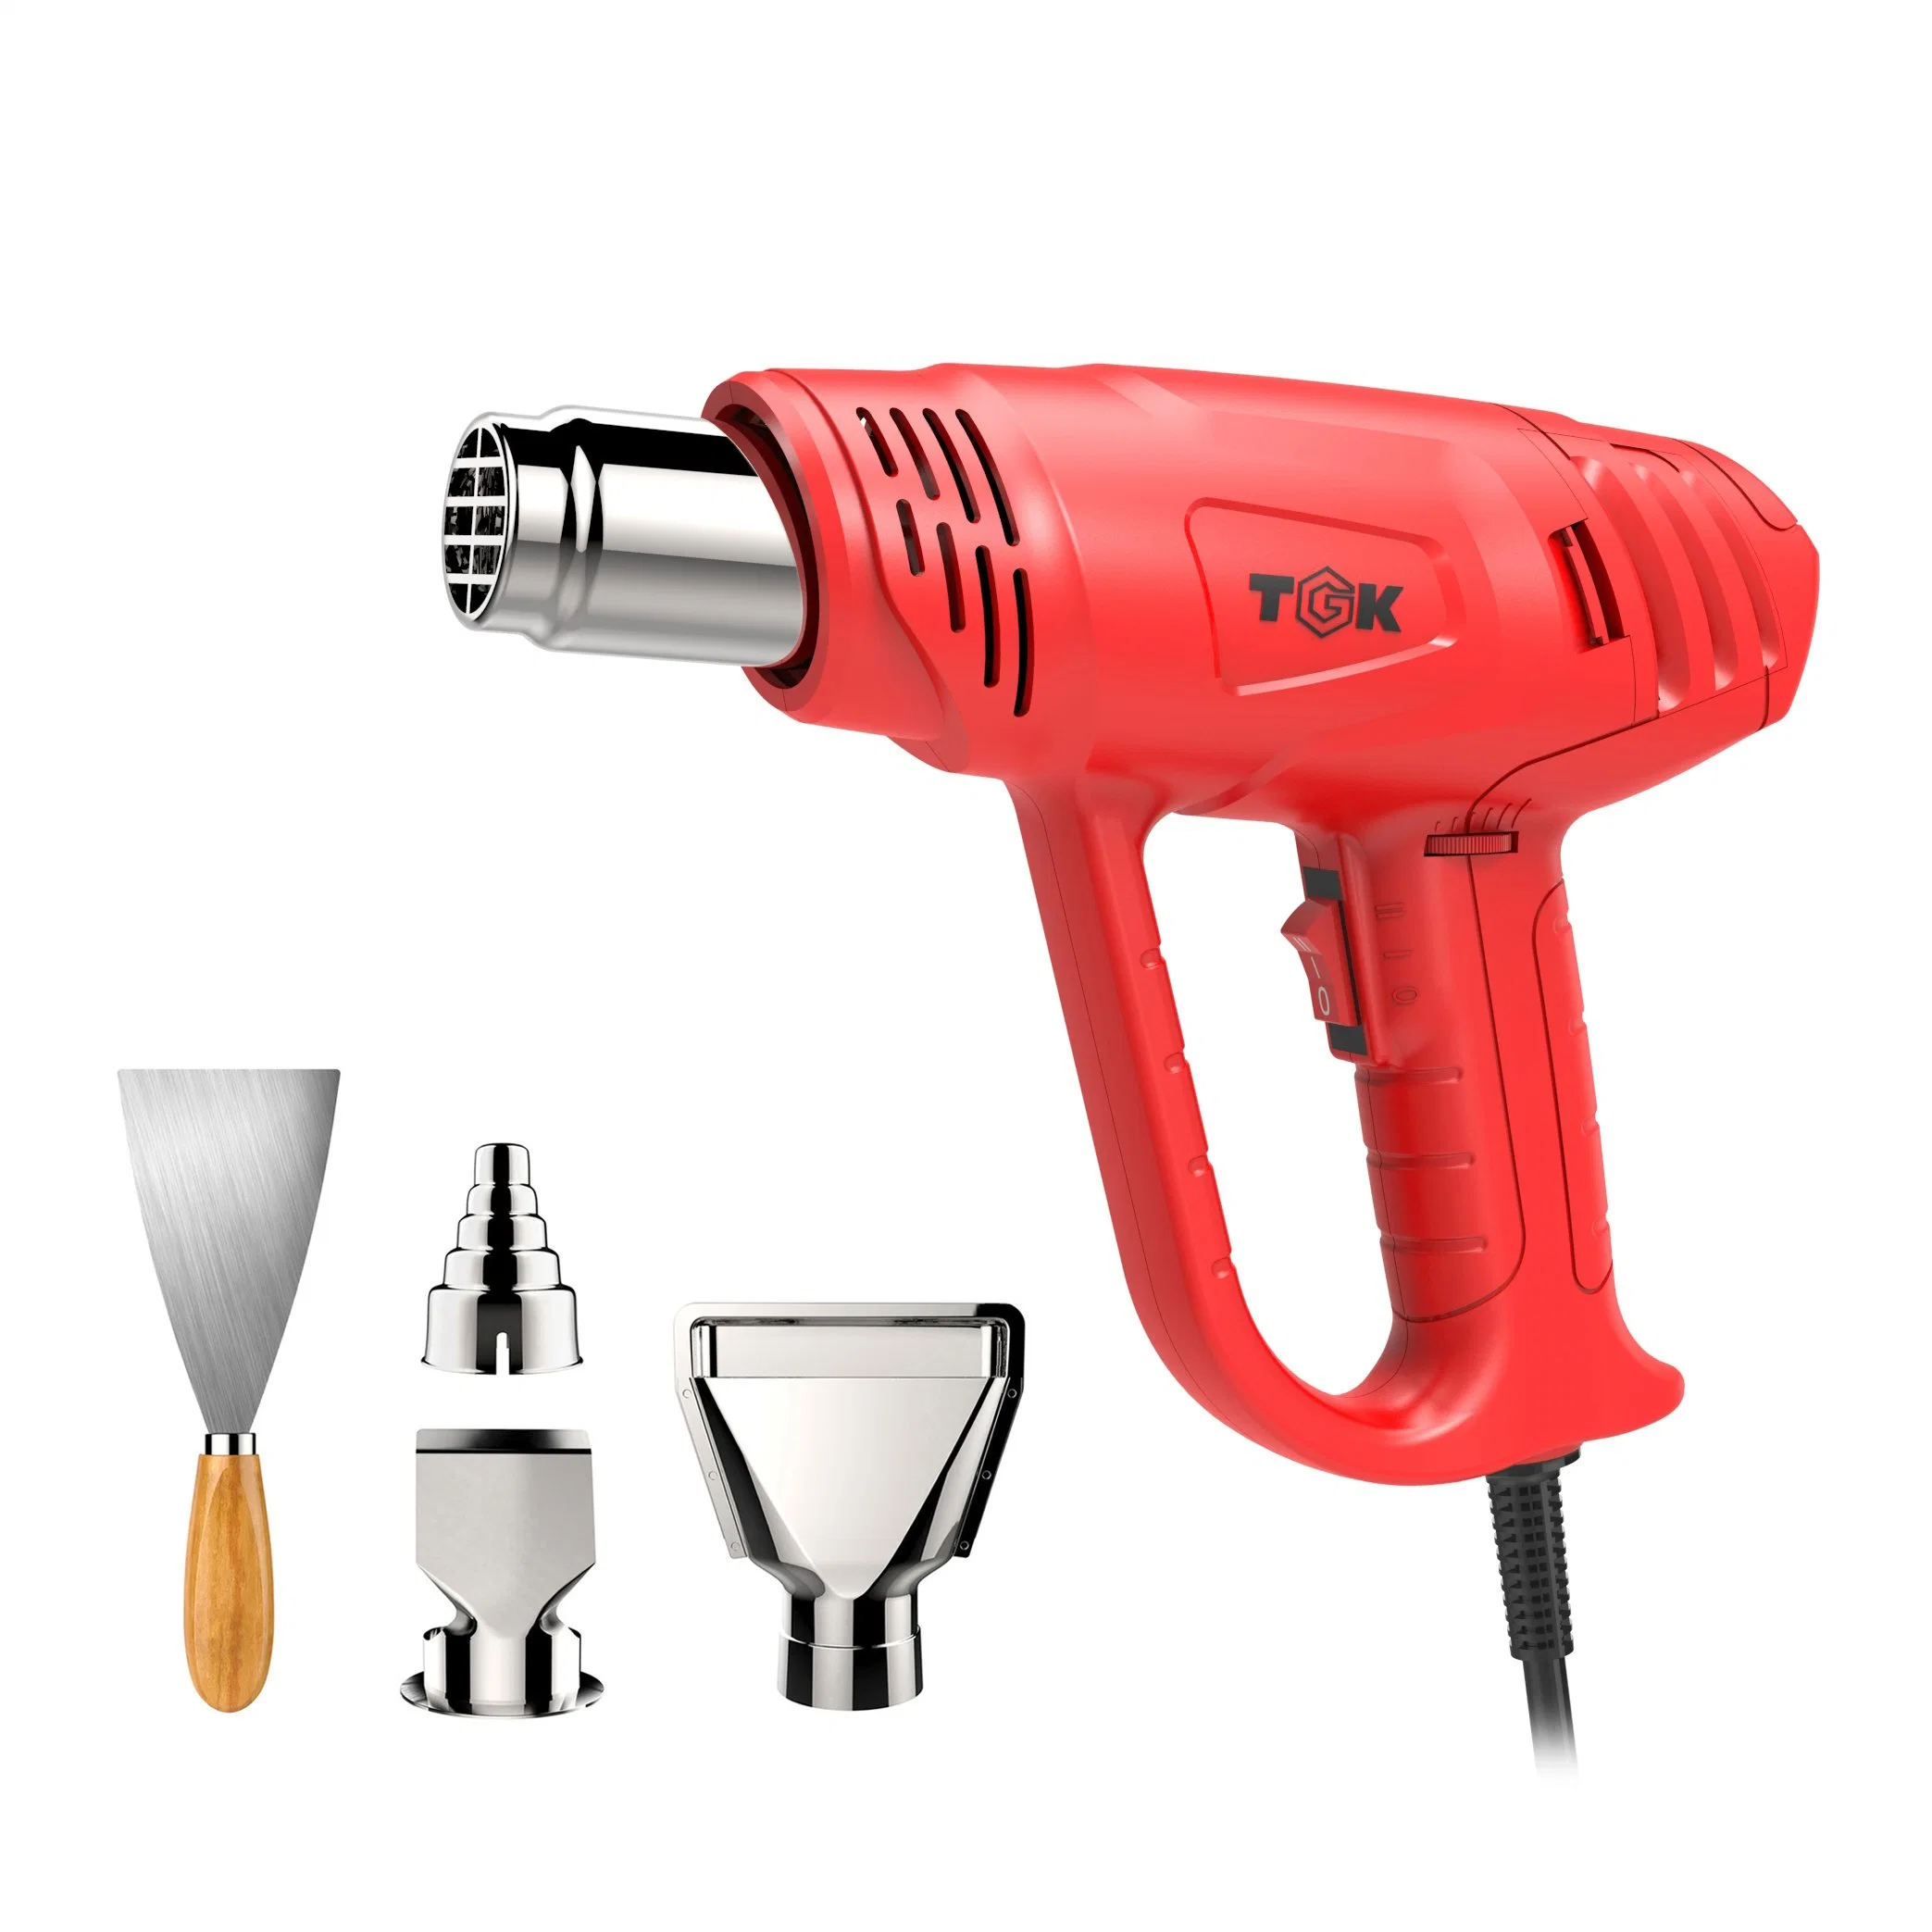 Portable Heat Gun to Help Remove Decals and Window Tint Hg5520